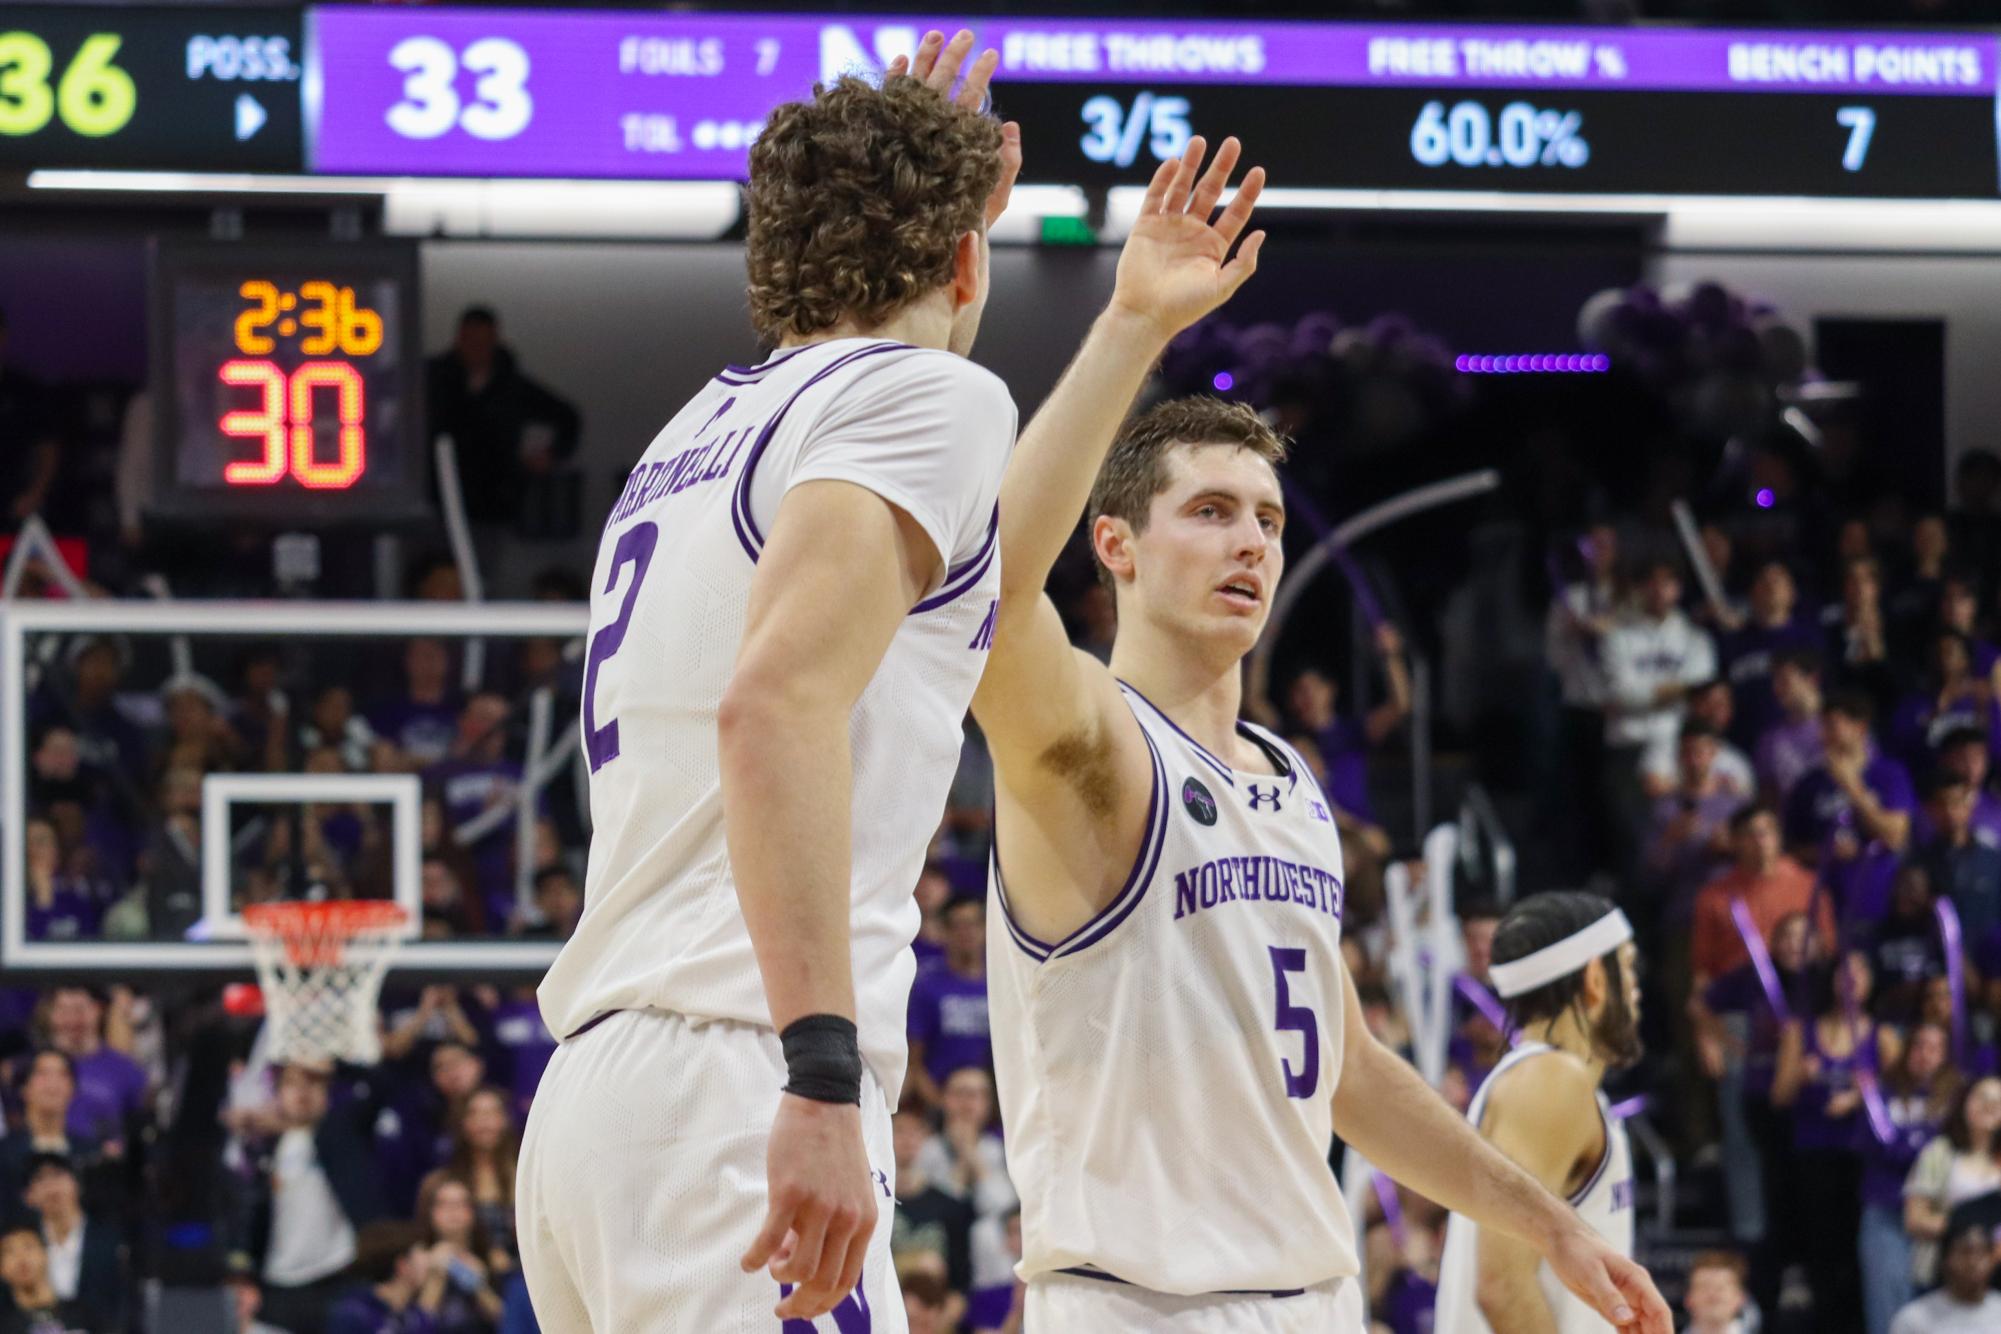 Northwestern’s graduate student guard Ryan Langborg and sophomore forward Nick Martinelli, both in white basketball uniforms, high-five each other in the middle of the court.